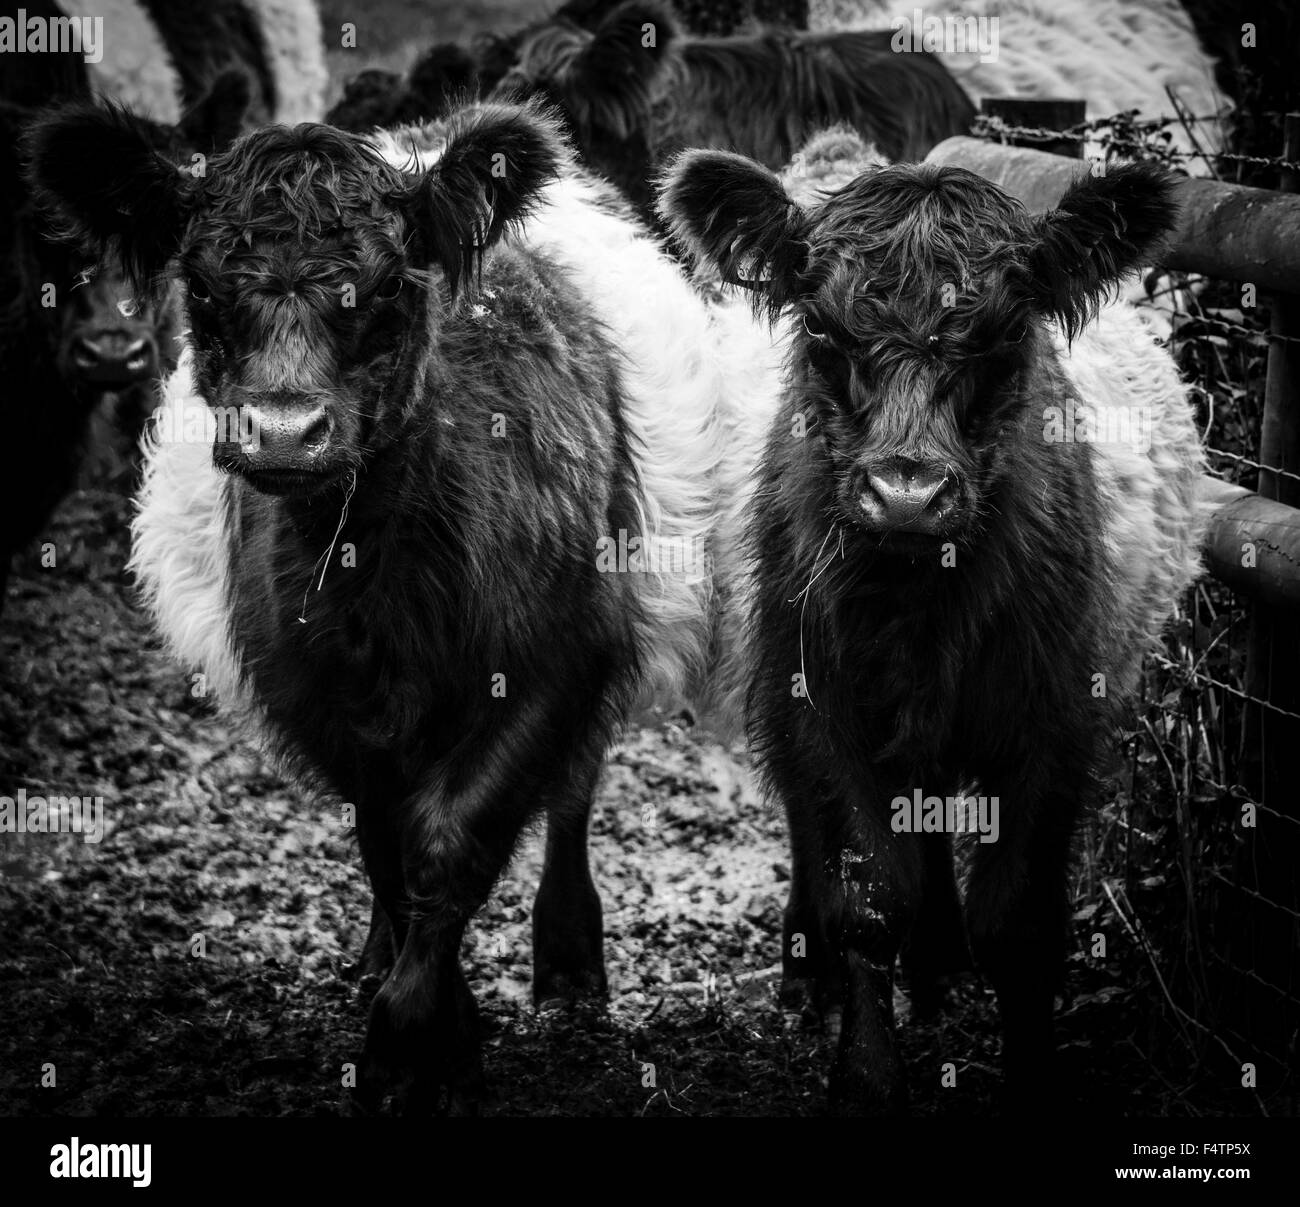 Belted Galloway cattle dans le Wiltshire, Angleterre. Banque D'Images